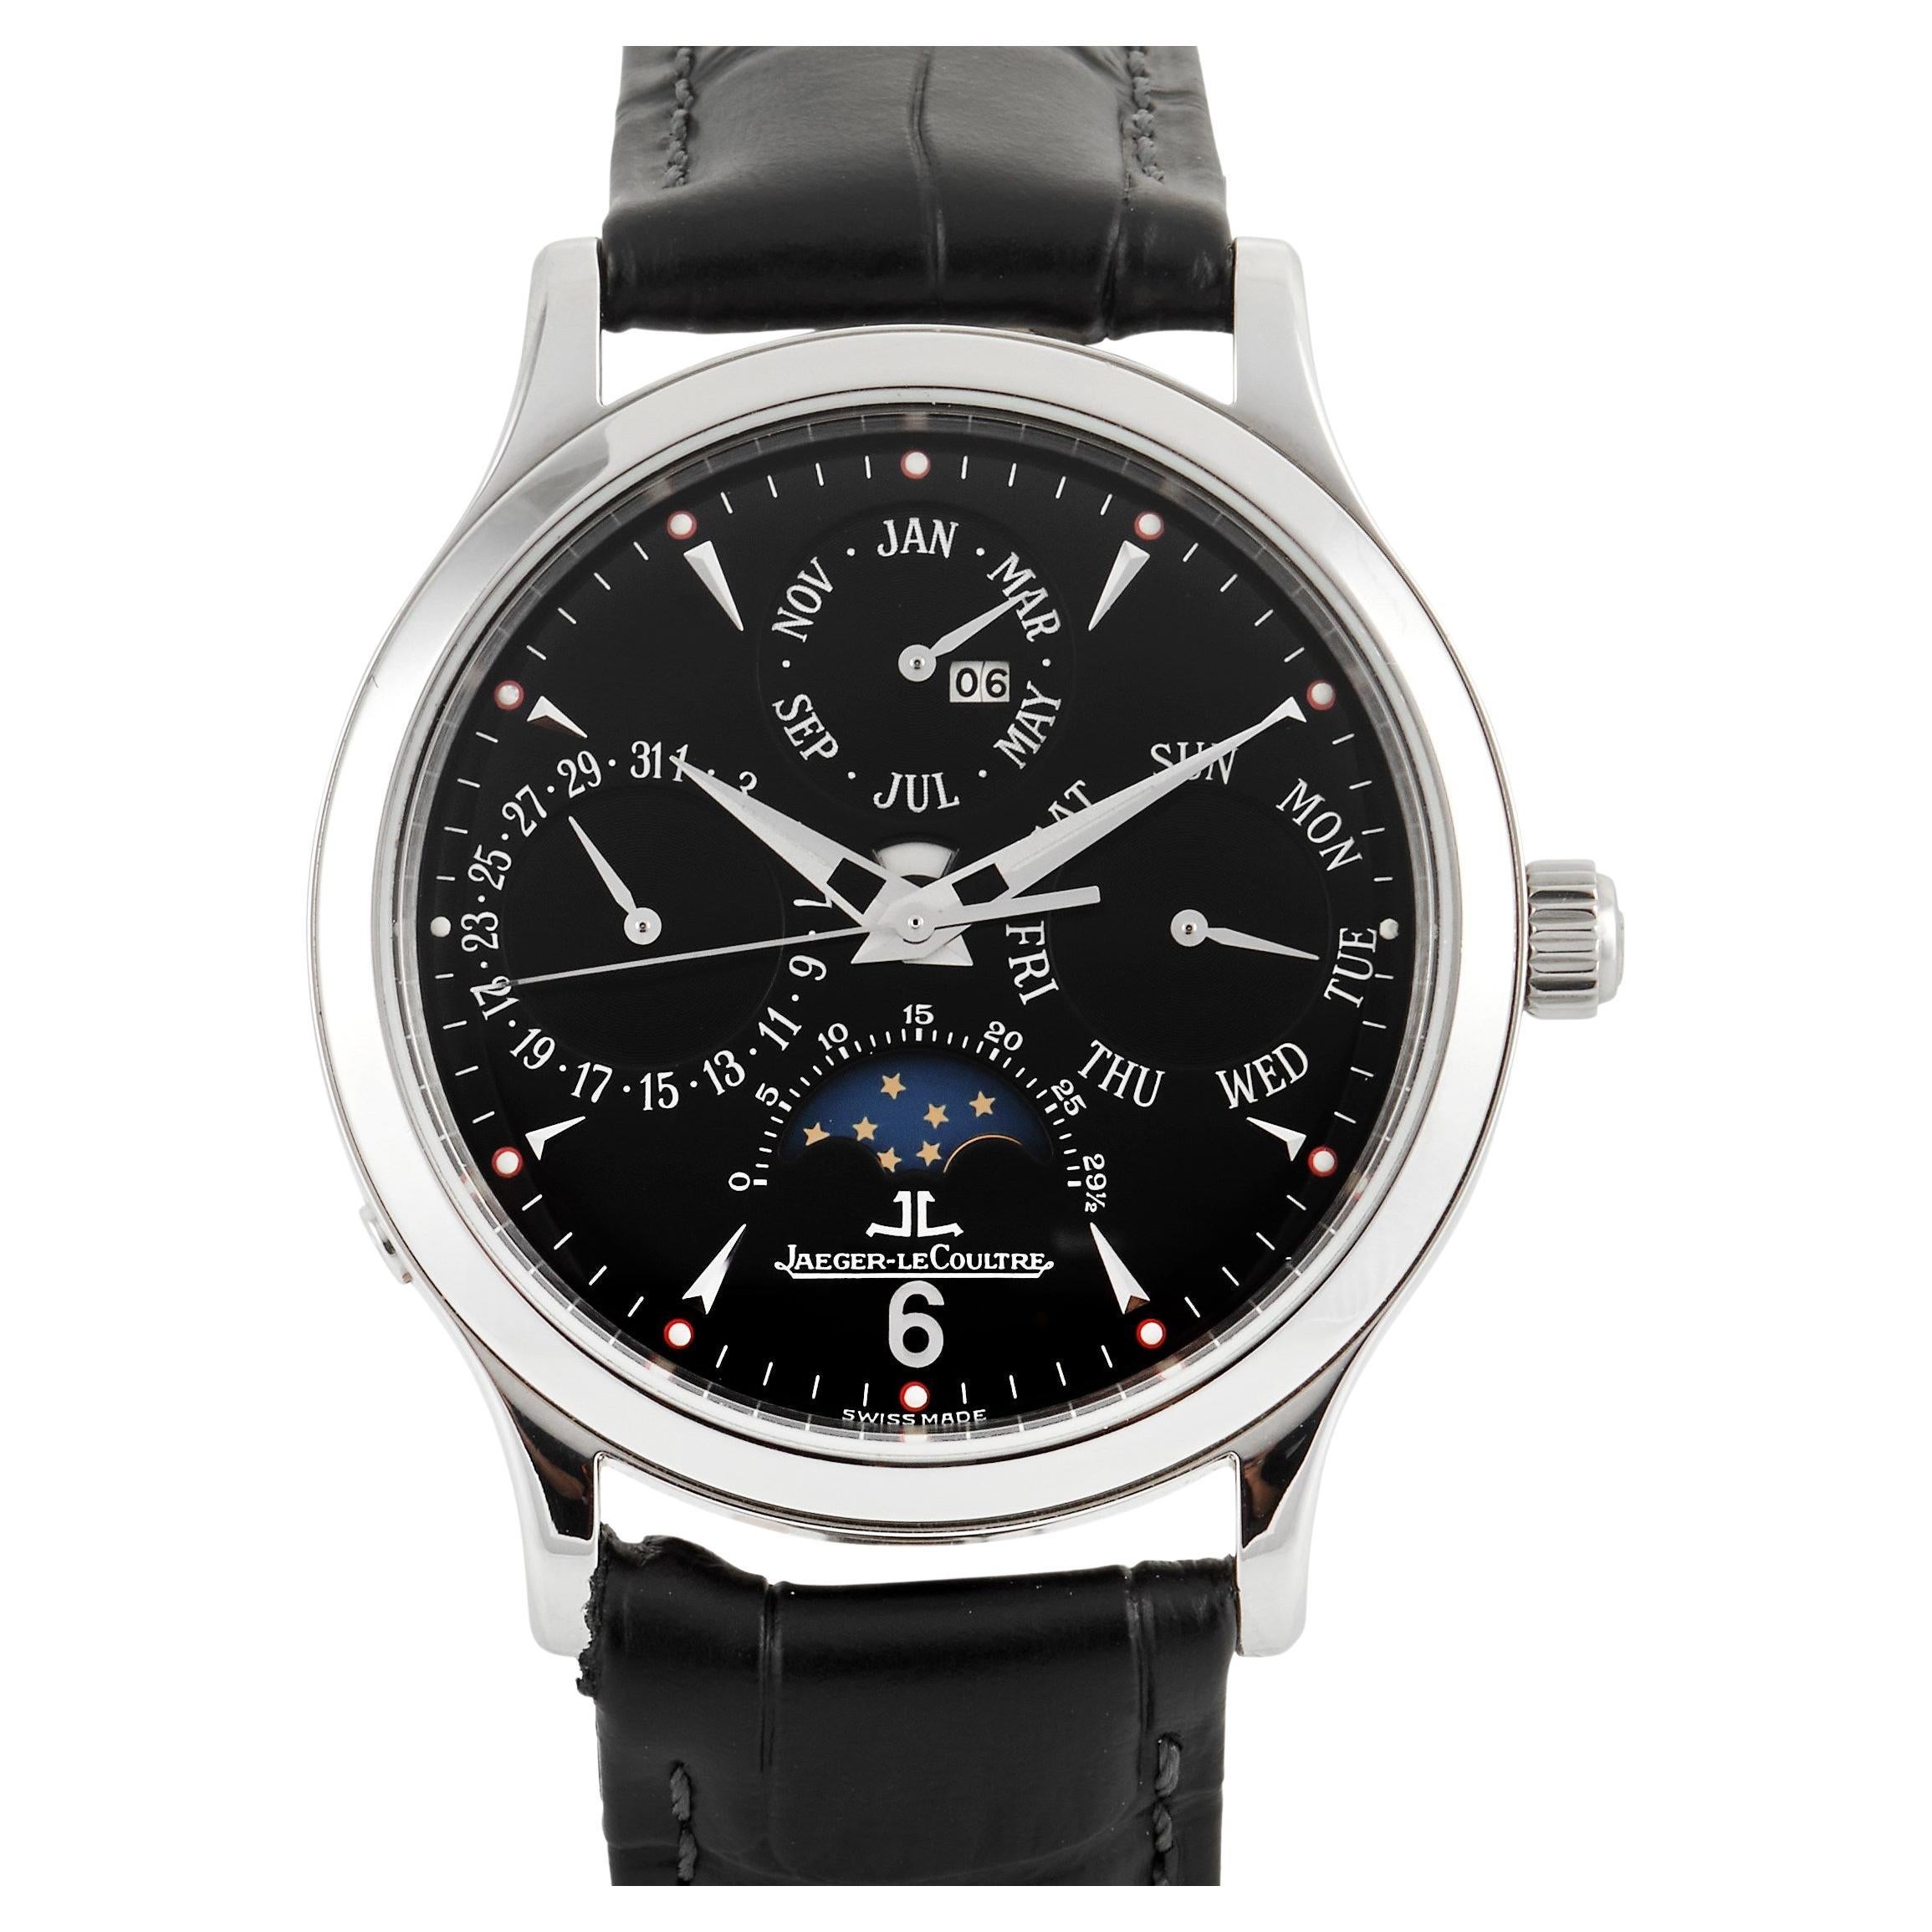 Jaeger-LeCoultre Master Perpetual Watch 149847A